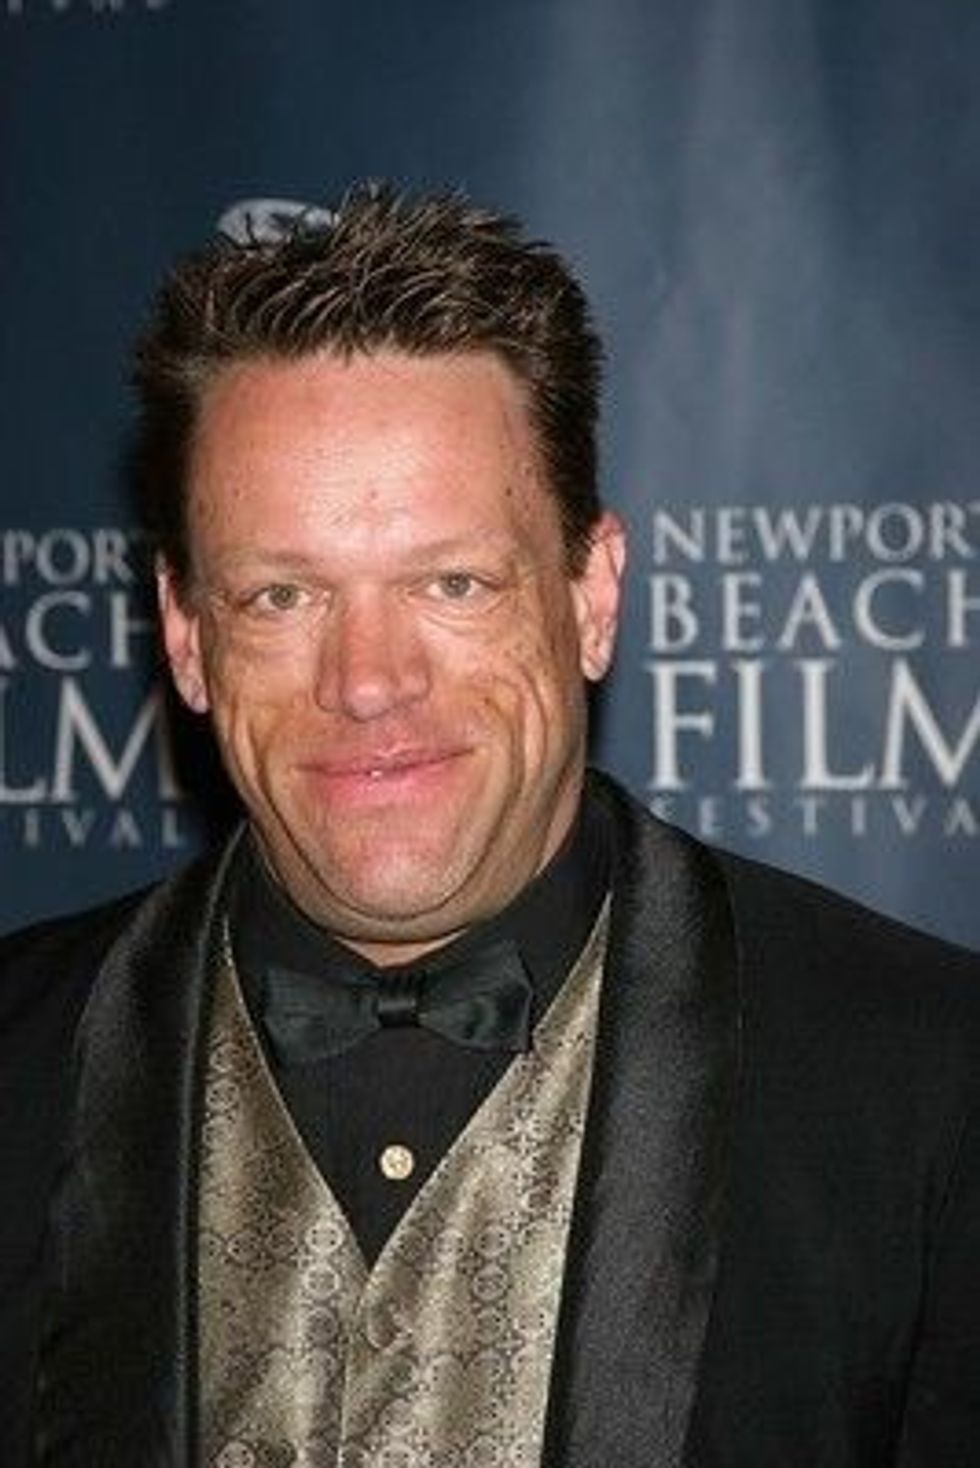 Brian Thompson graduated from Central Washington University and the University of California